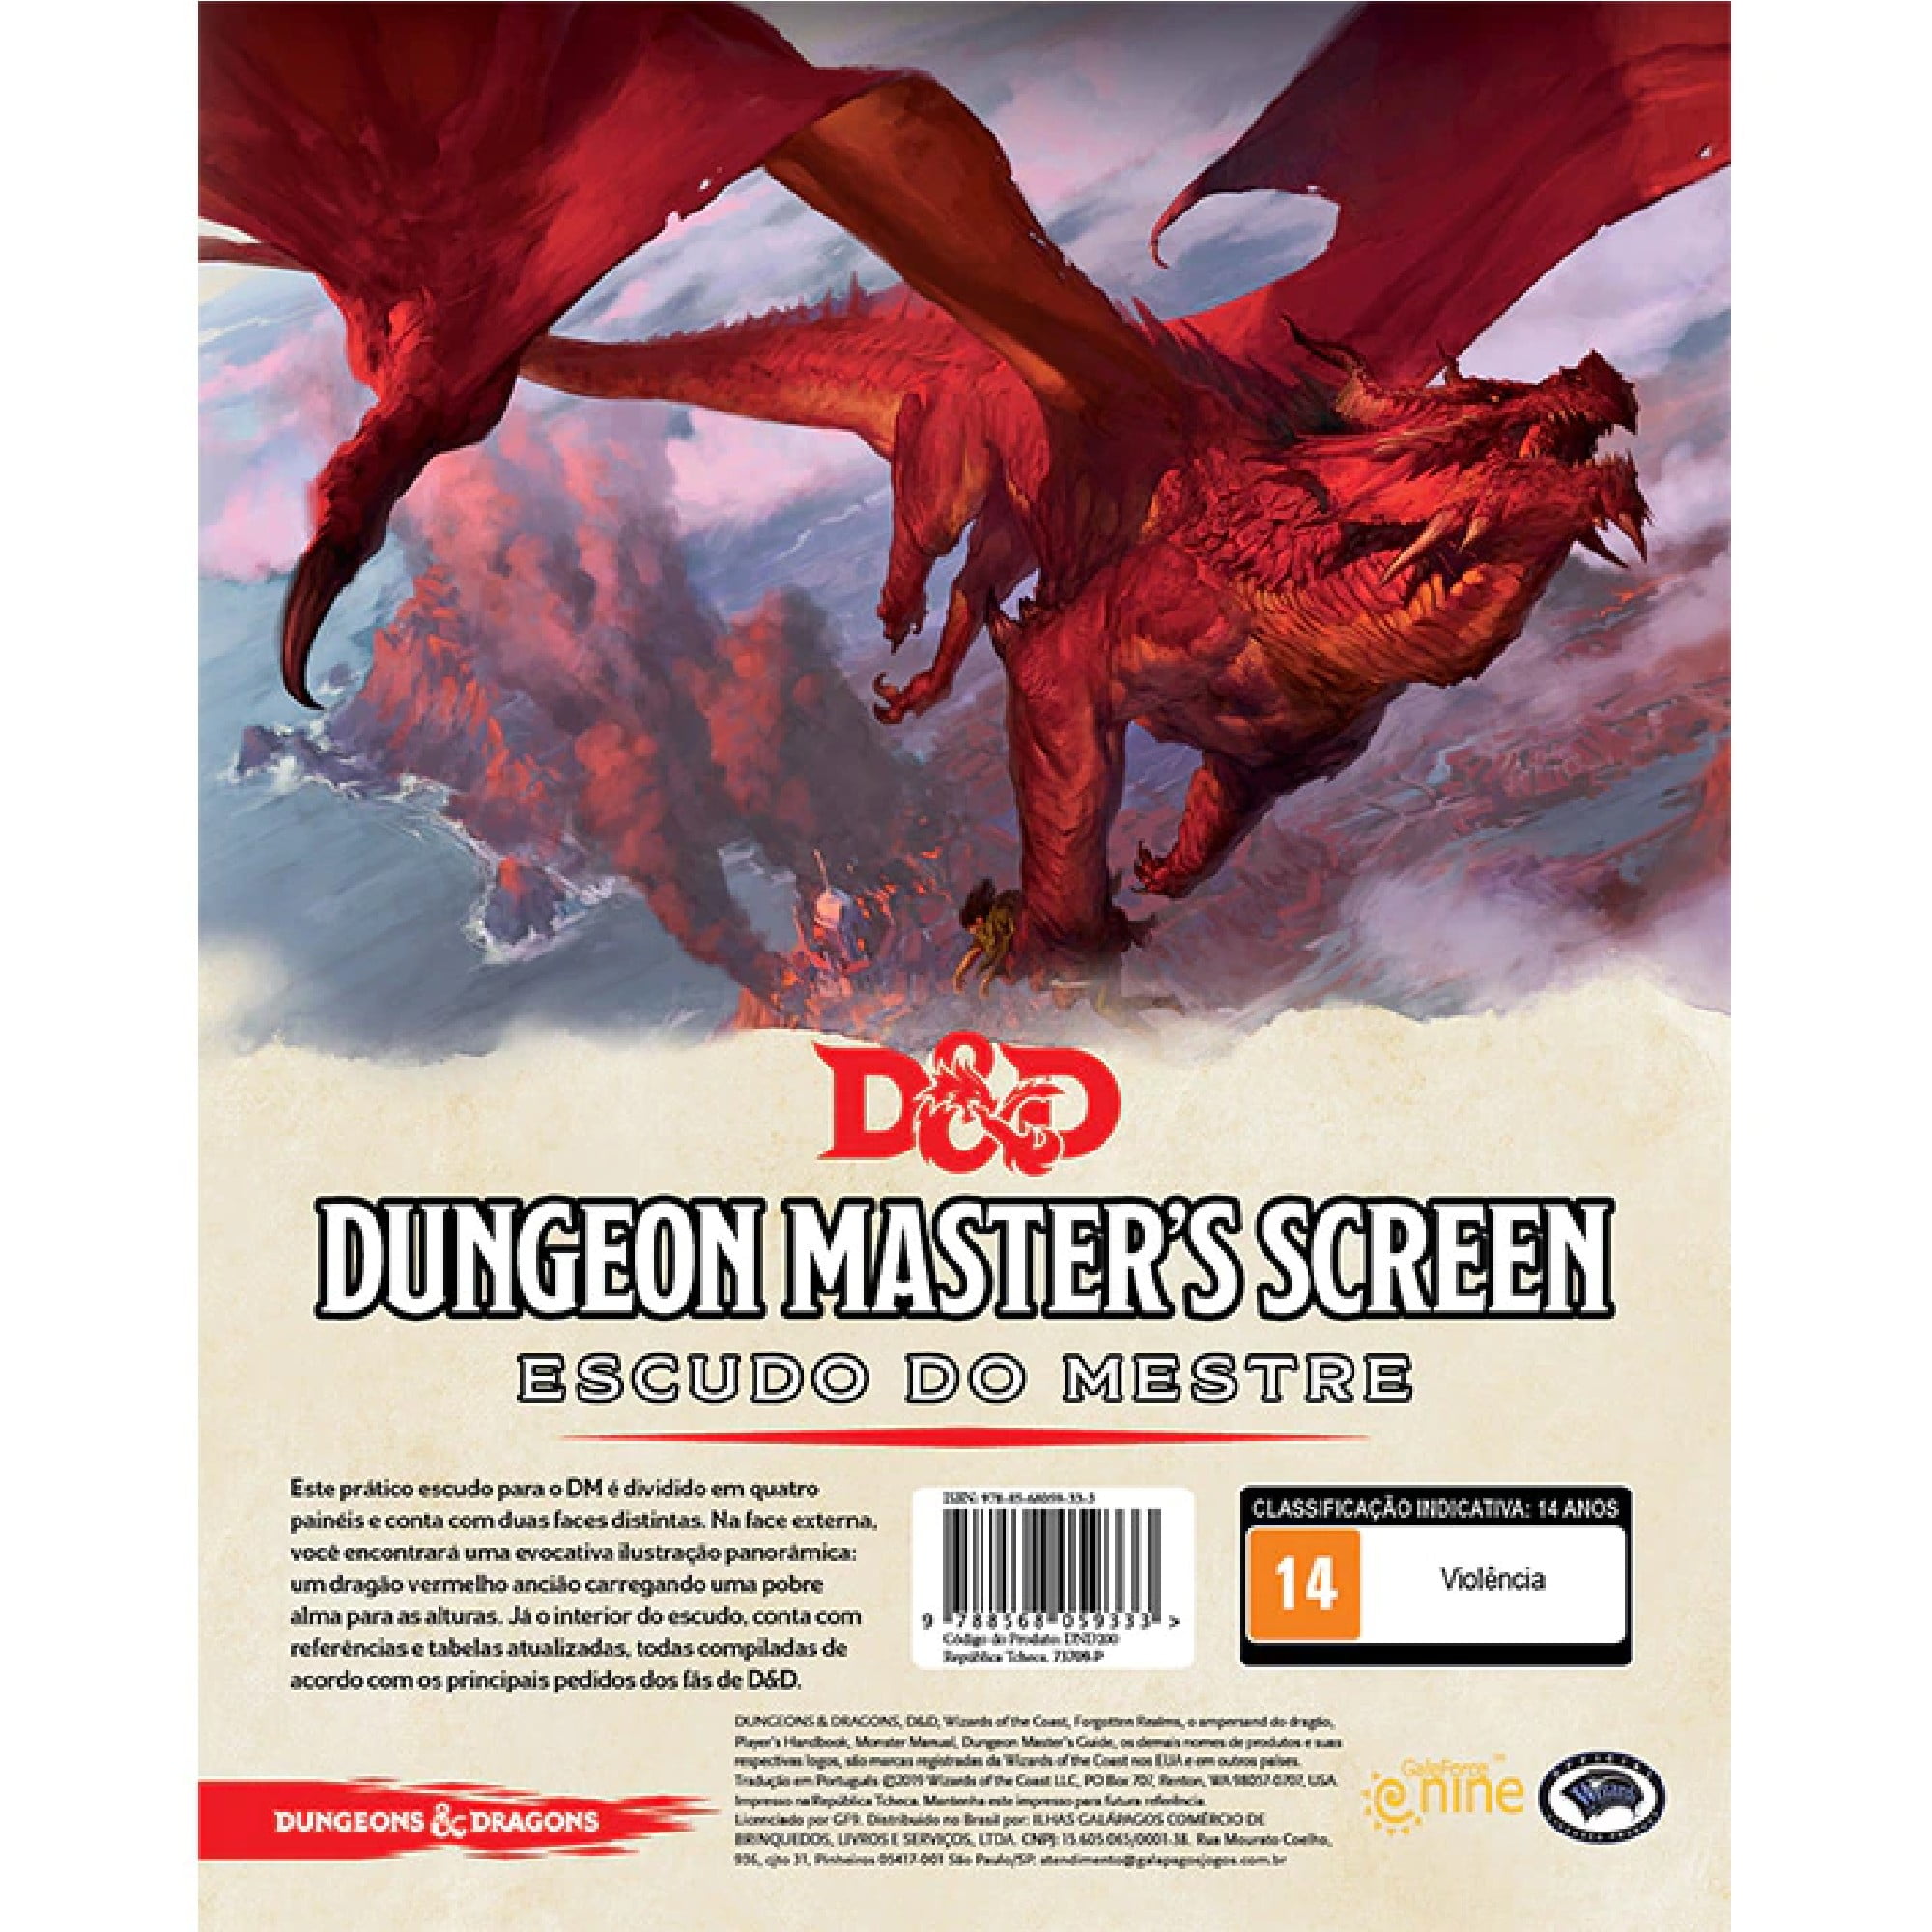 Dungeons & Dragons - Dungeon Master's Screen - Escudo do Mestre